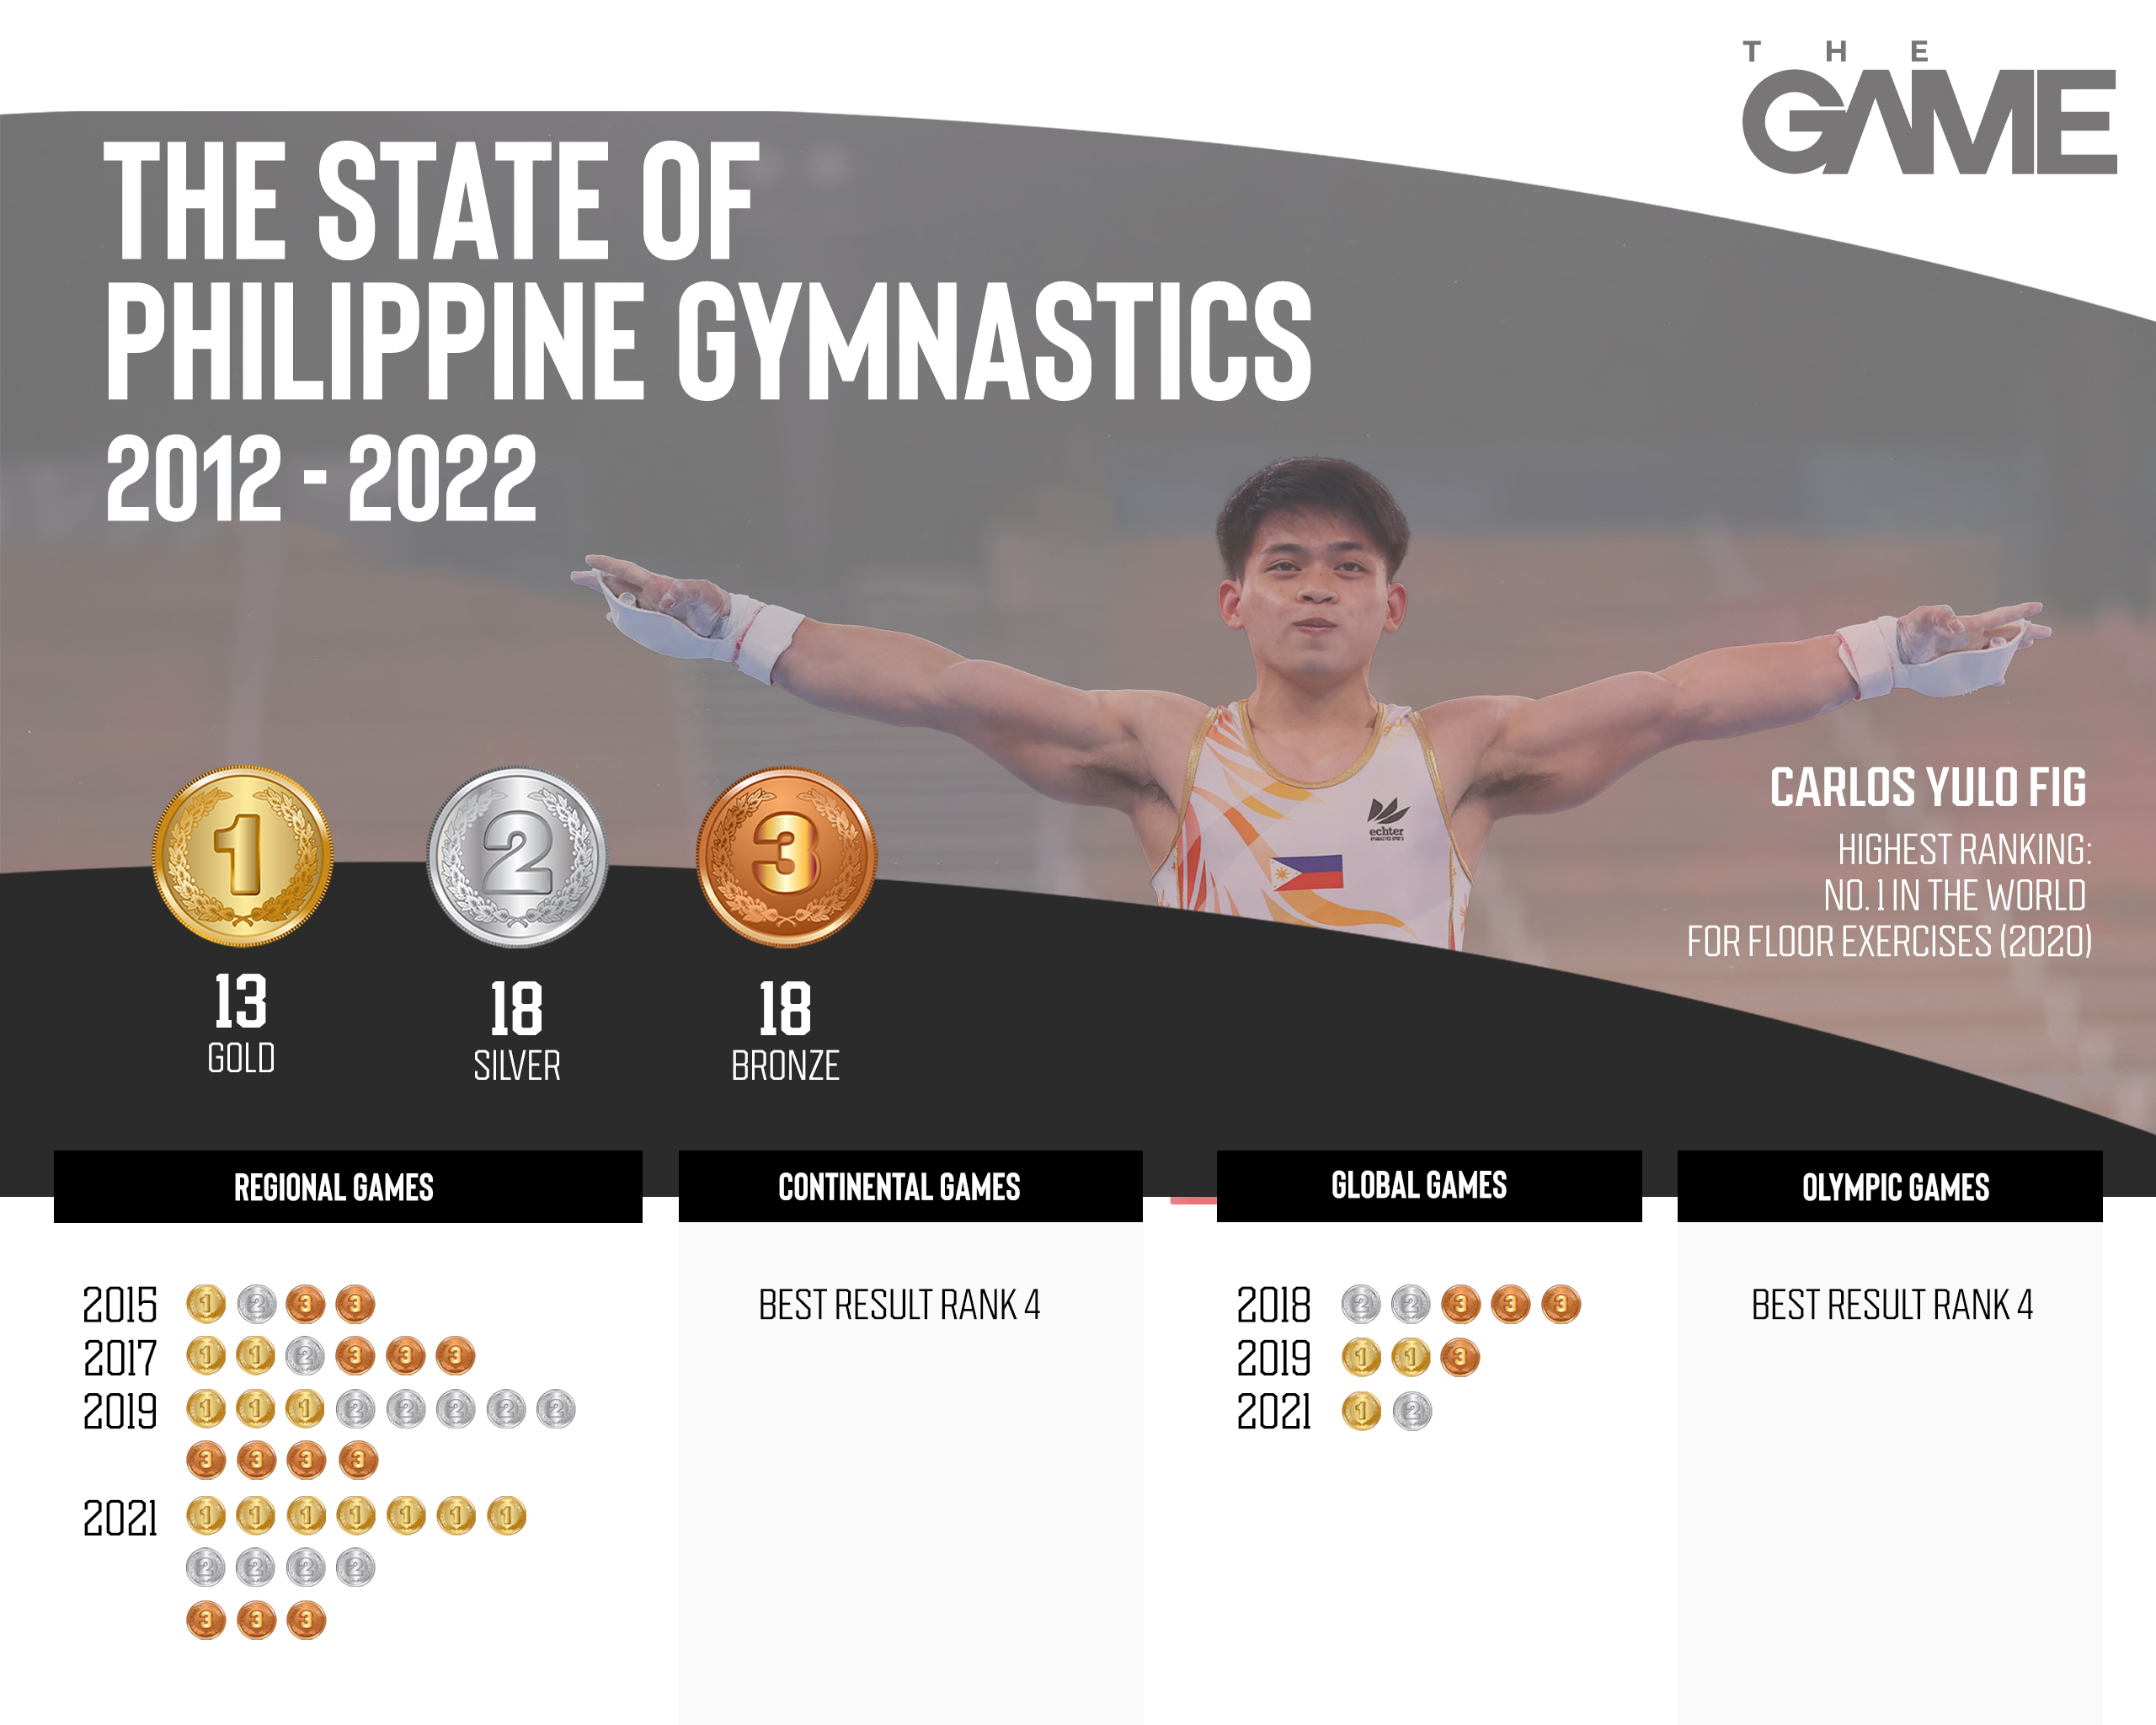 The Philippines' gymnastics medals from 2012 to 2022.